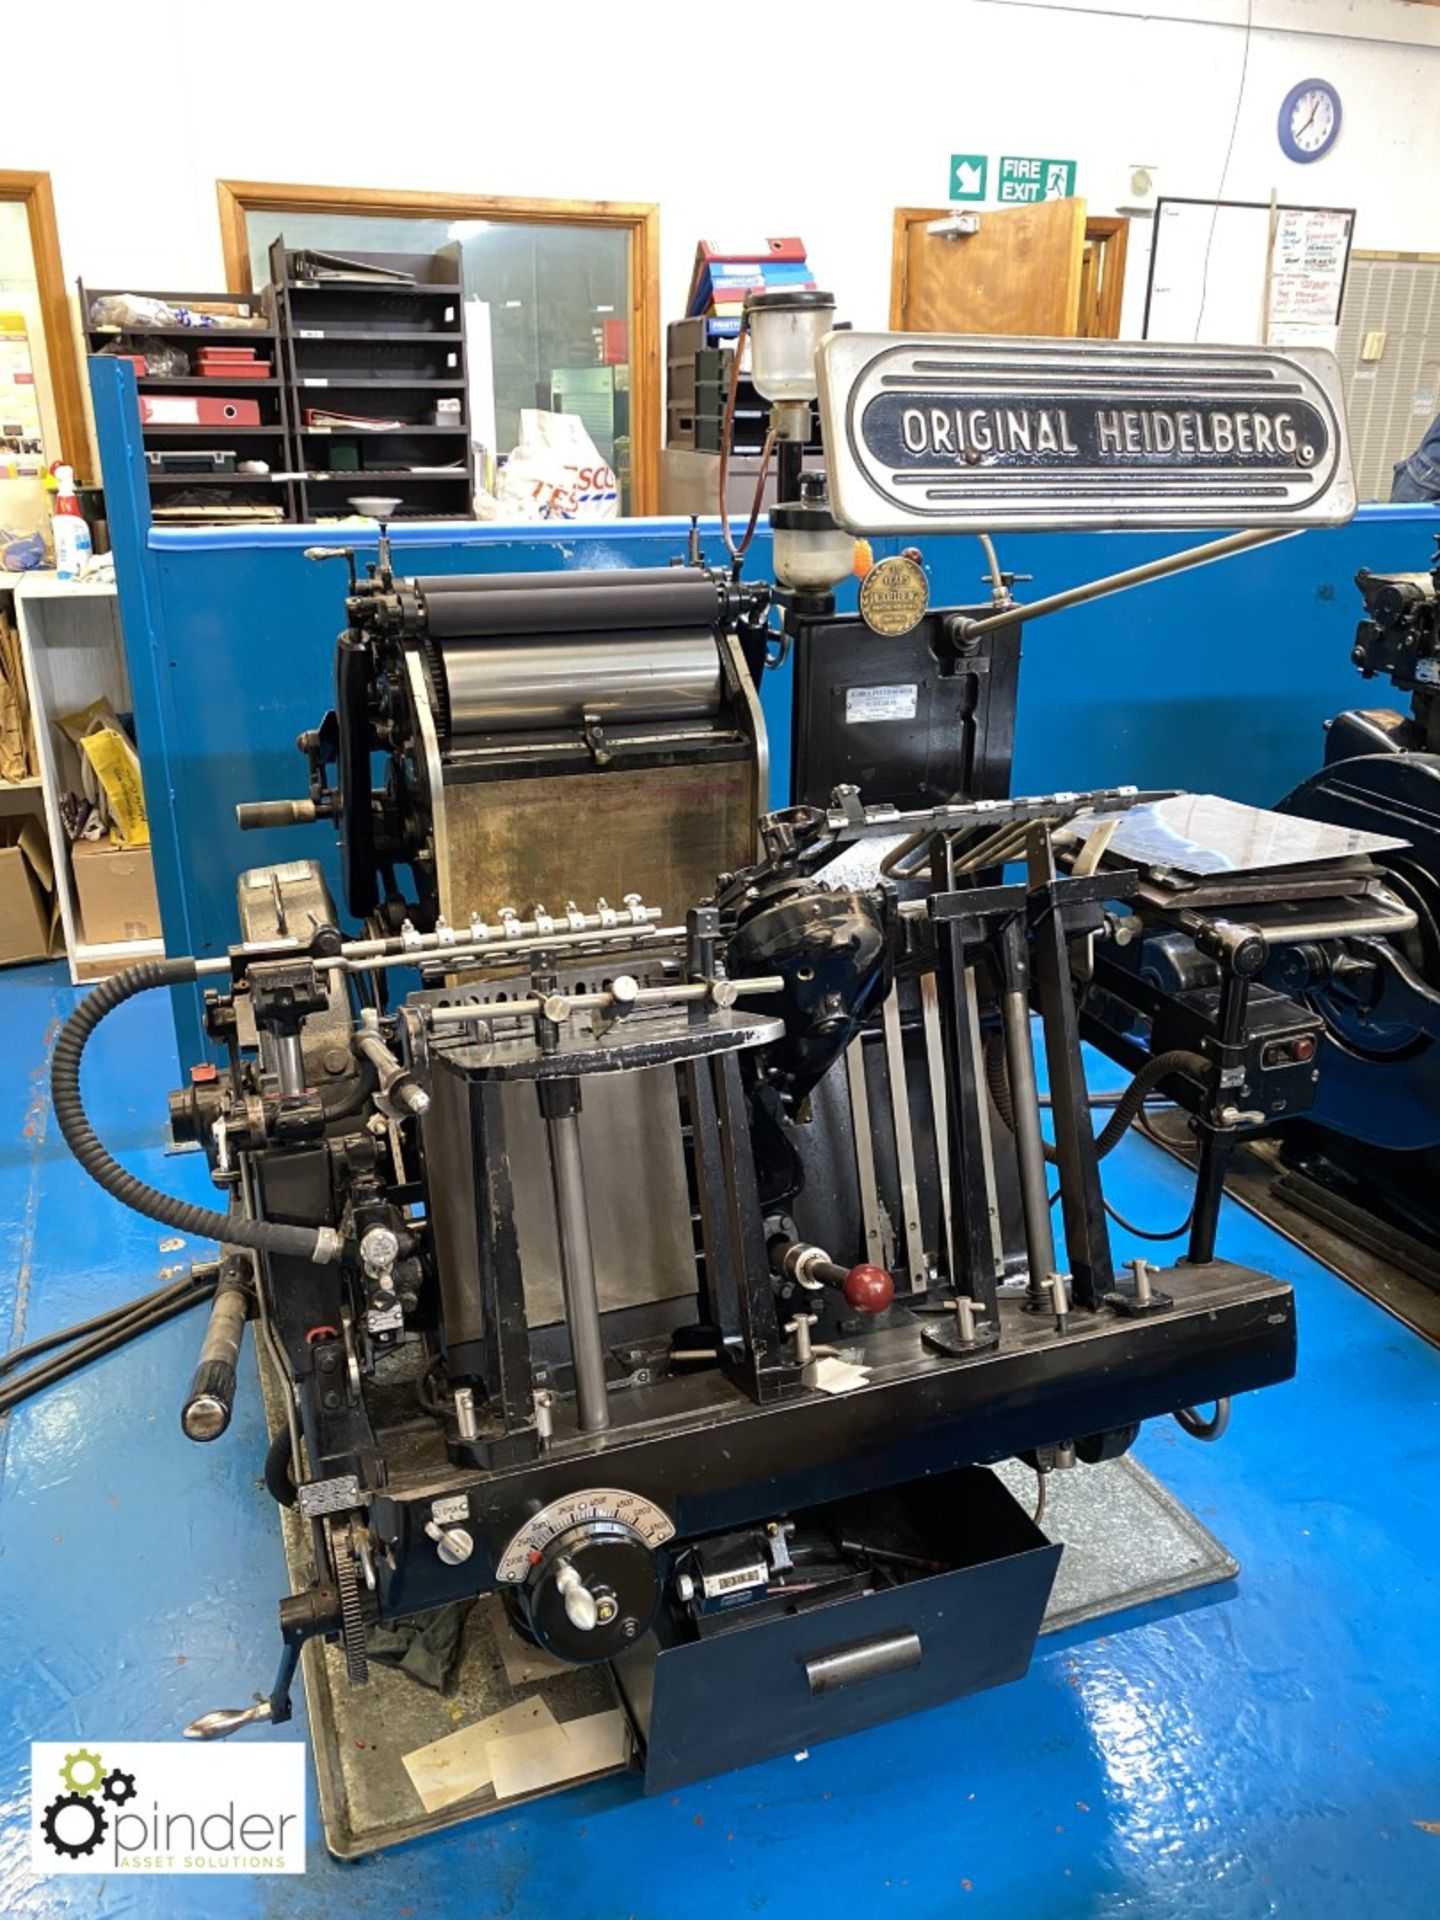 Heidelberg 10x15 Roller Lock Platen Press, 2 chases, 2 cutting plates, serial number T161-683E (